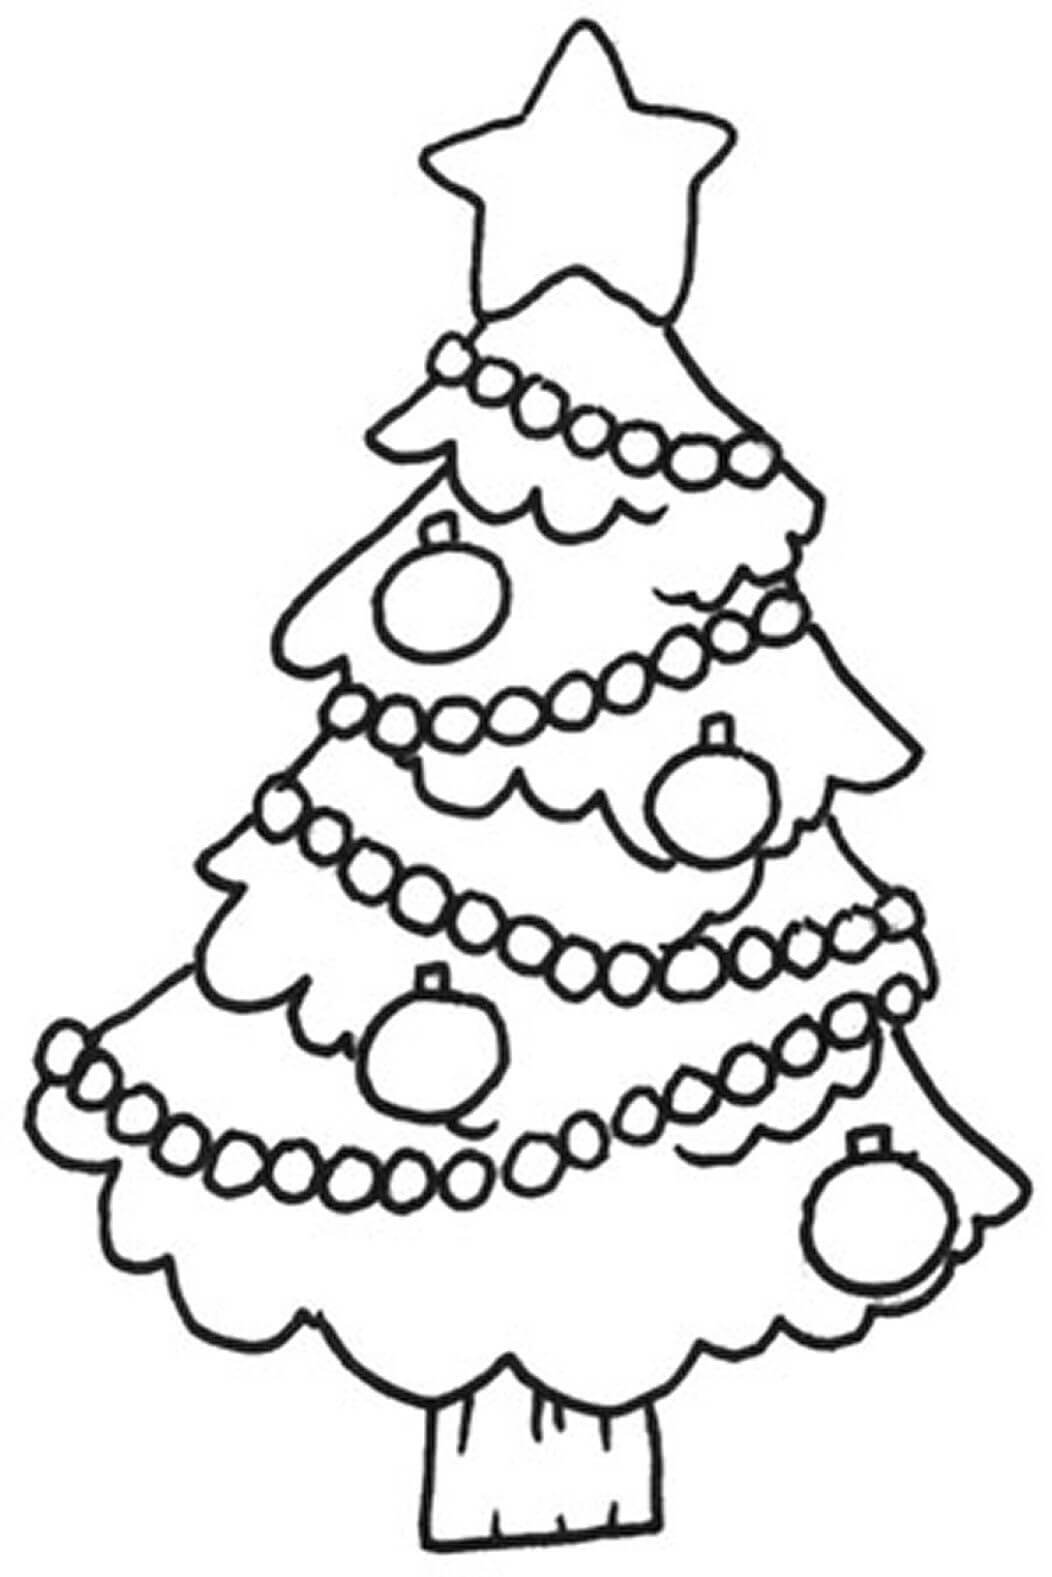 Christmas Tree Coloring Page For Preschool